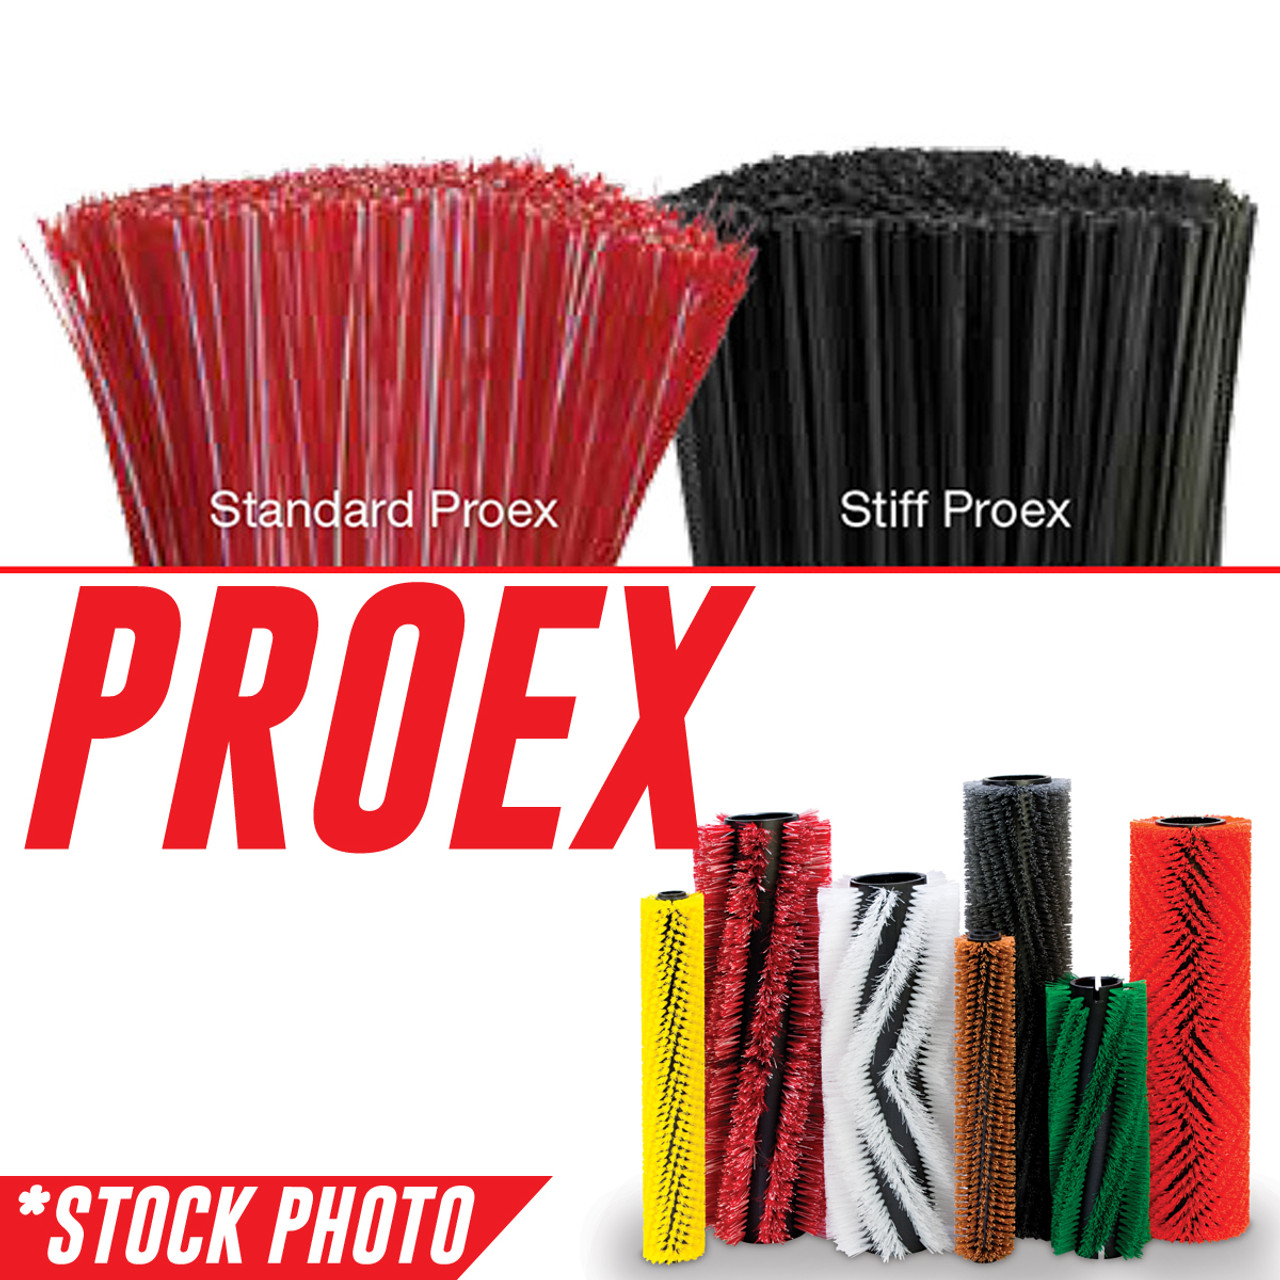 8-08-03180: 50" Cylindrical Brush 8 Double Row Proex/Wire fits American-Lincoln Models 3300, 7700, 7760, 7765